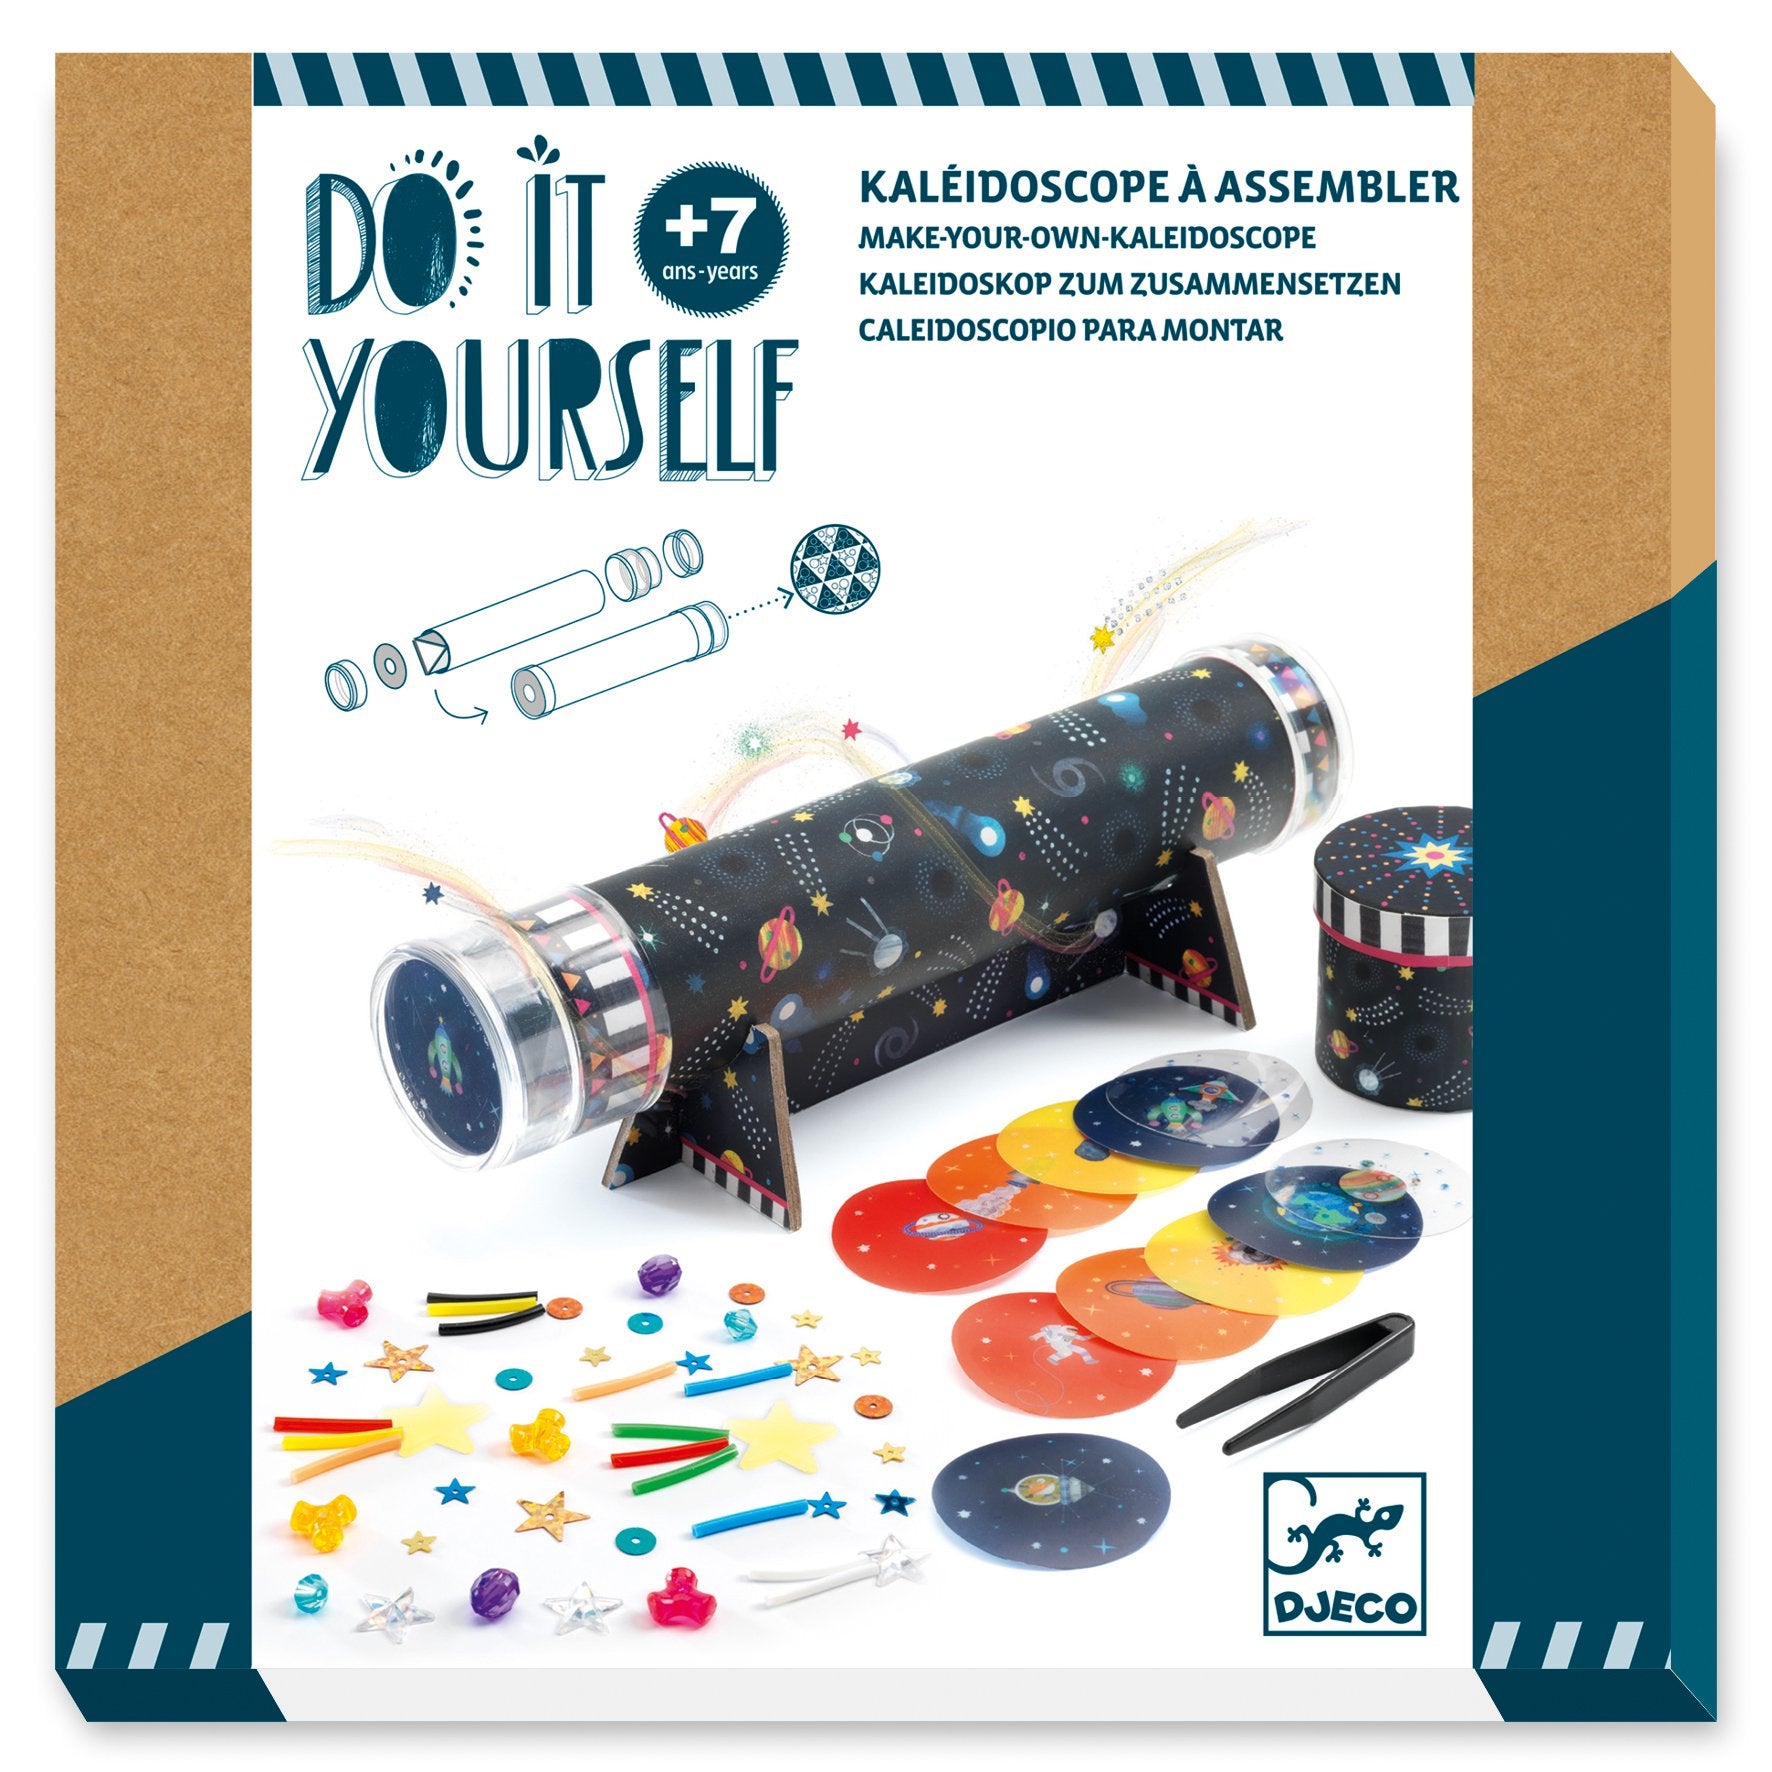 Build Your Own Art Supply Kits